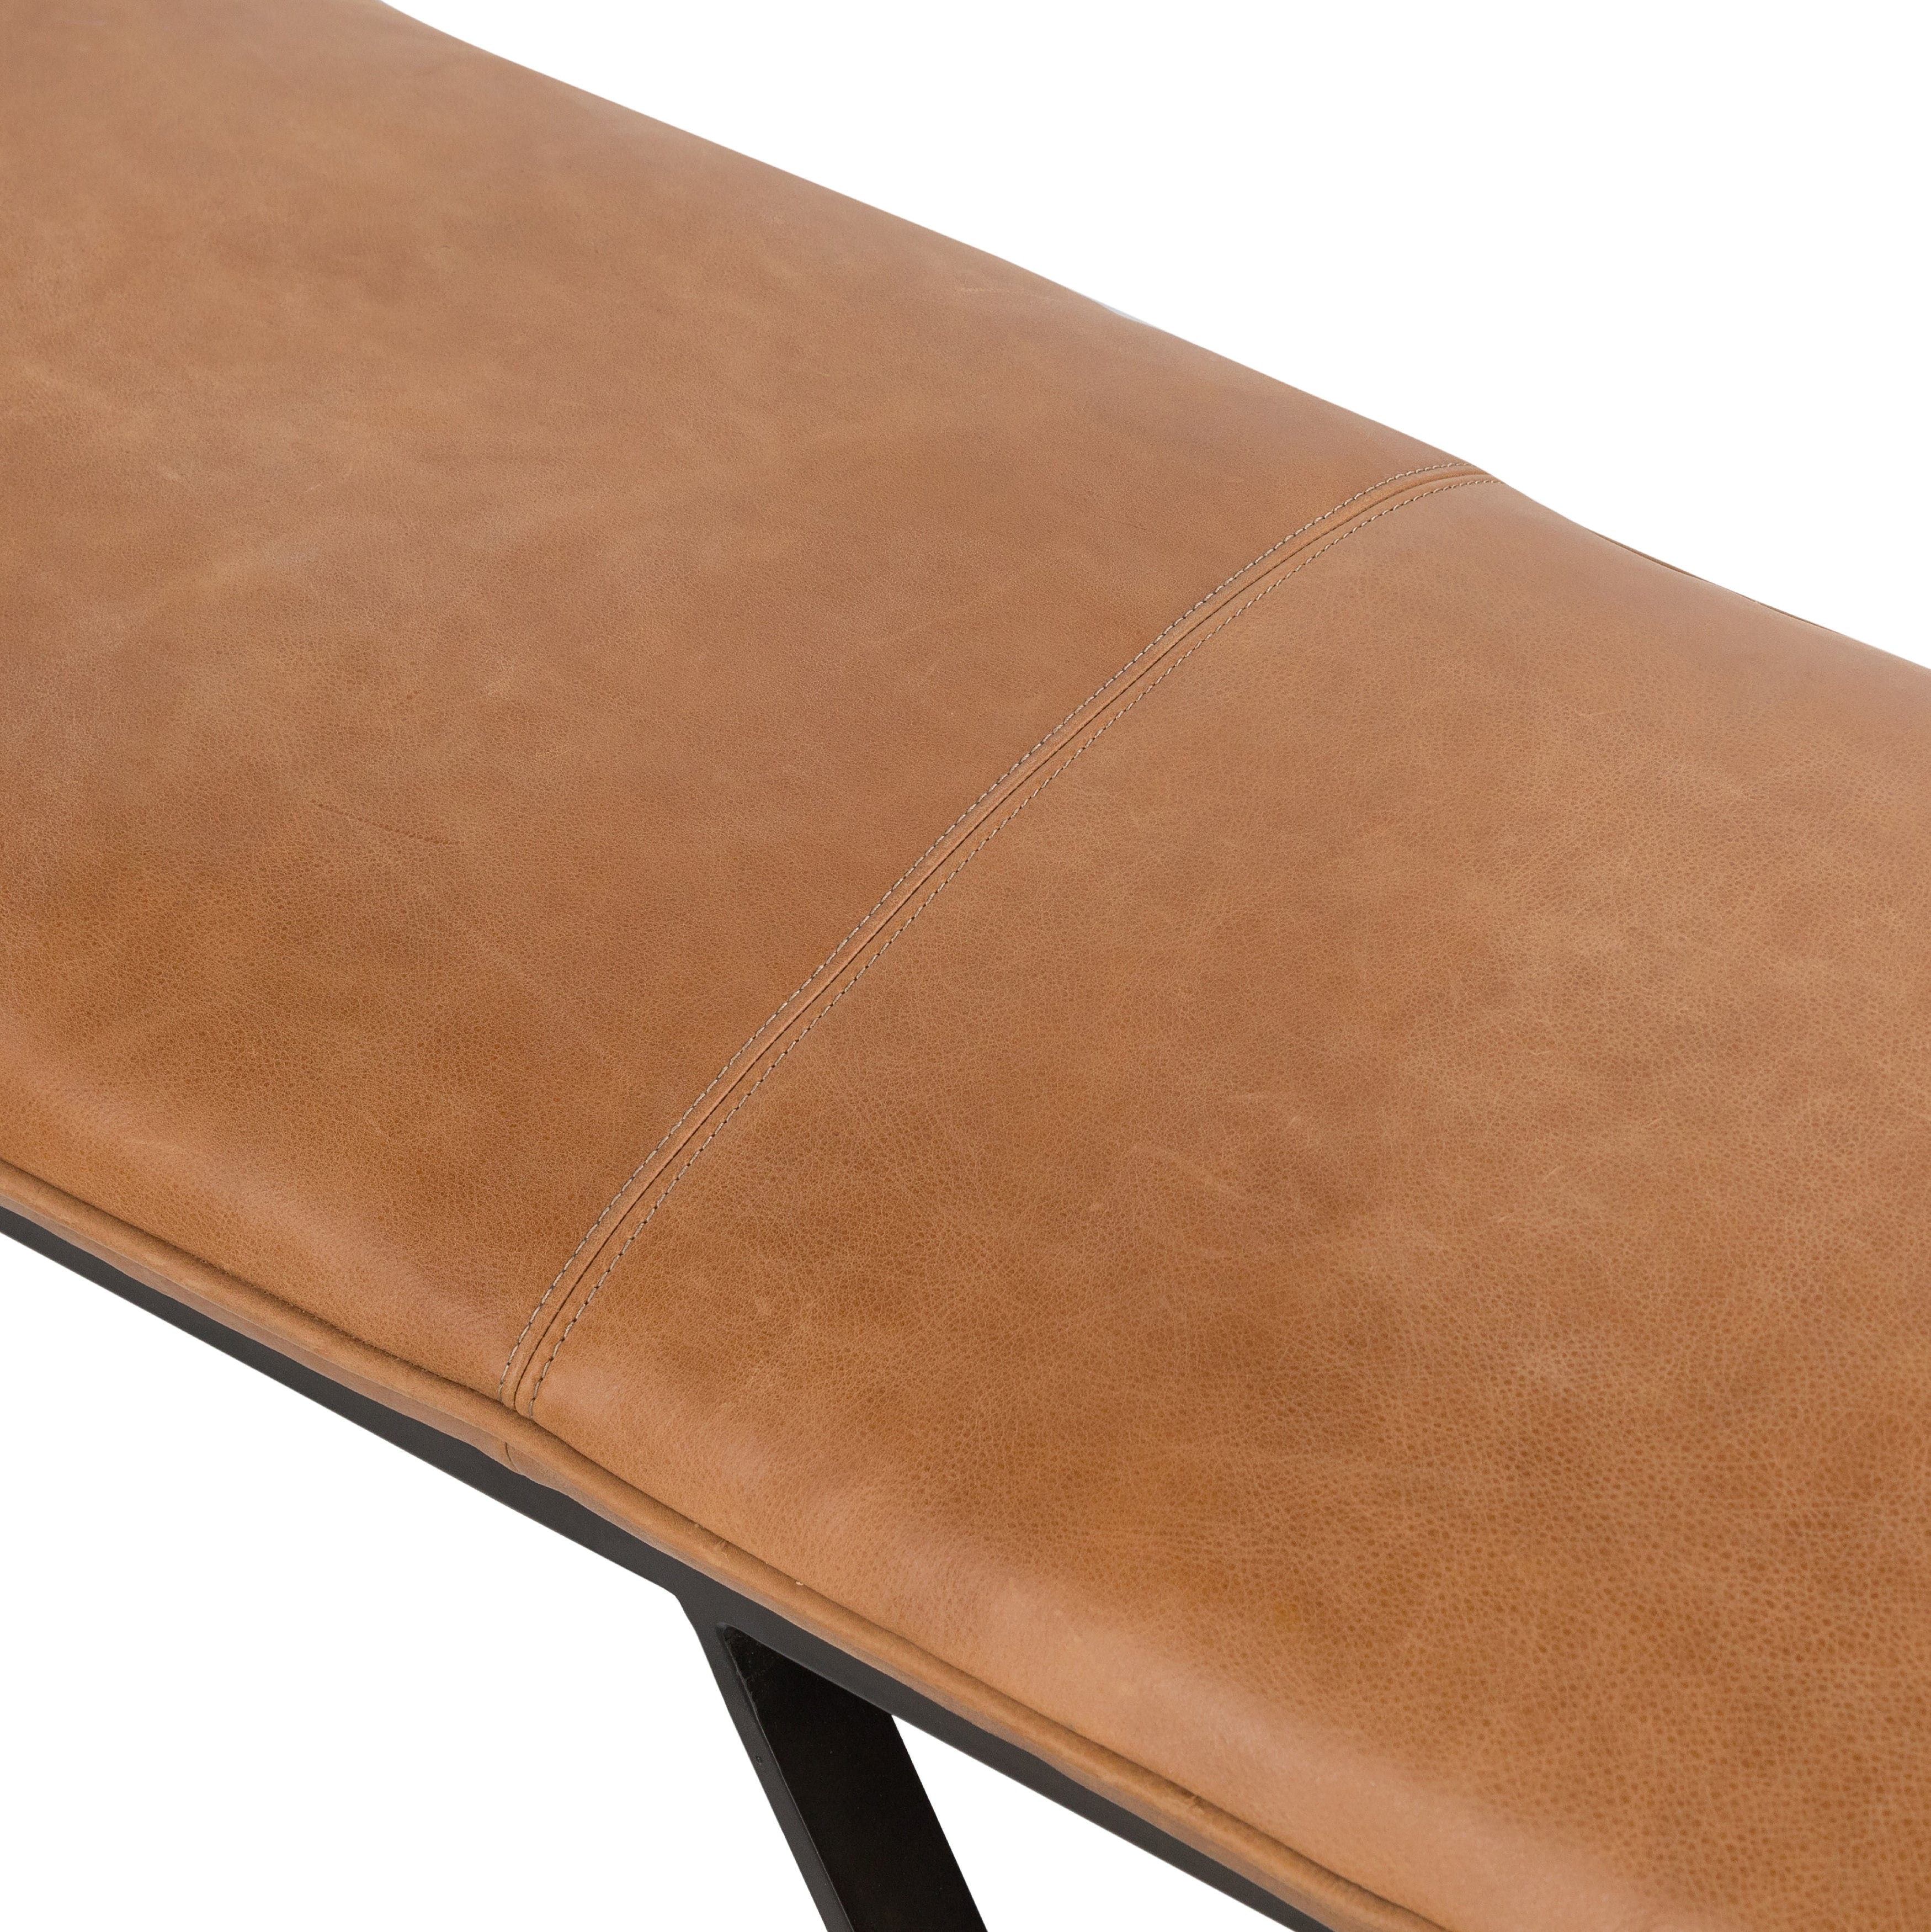 The Darrow Bench -  Palermo Cognac is a time-honored bench, reinvented. With fresh, clever shaping, angular gunmetal-finished iron supports spare-yet-comfortable top-grain leather cushioning in a rich cognac.  Overall Dimensions: 63.50"w x 17.50"d x 17.75"h